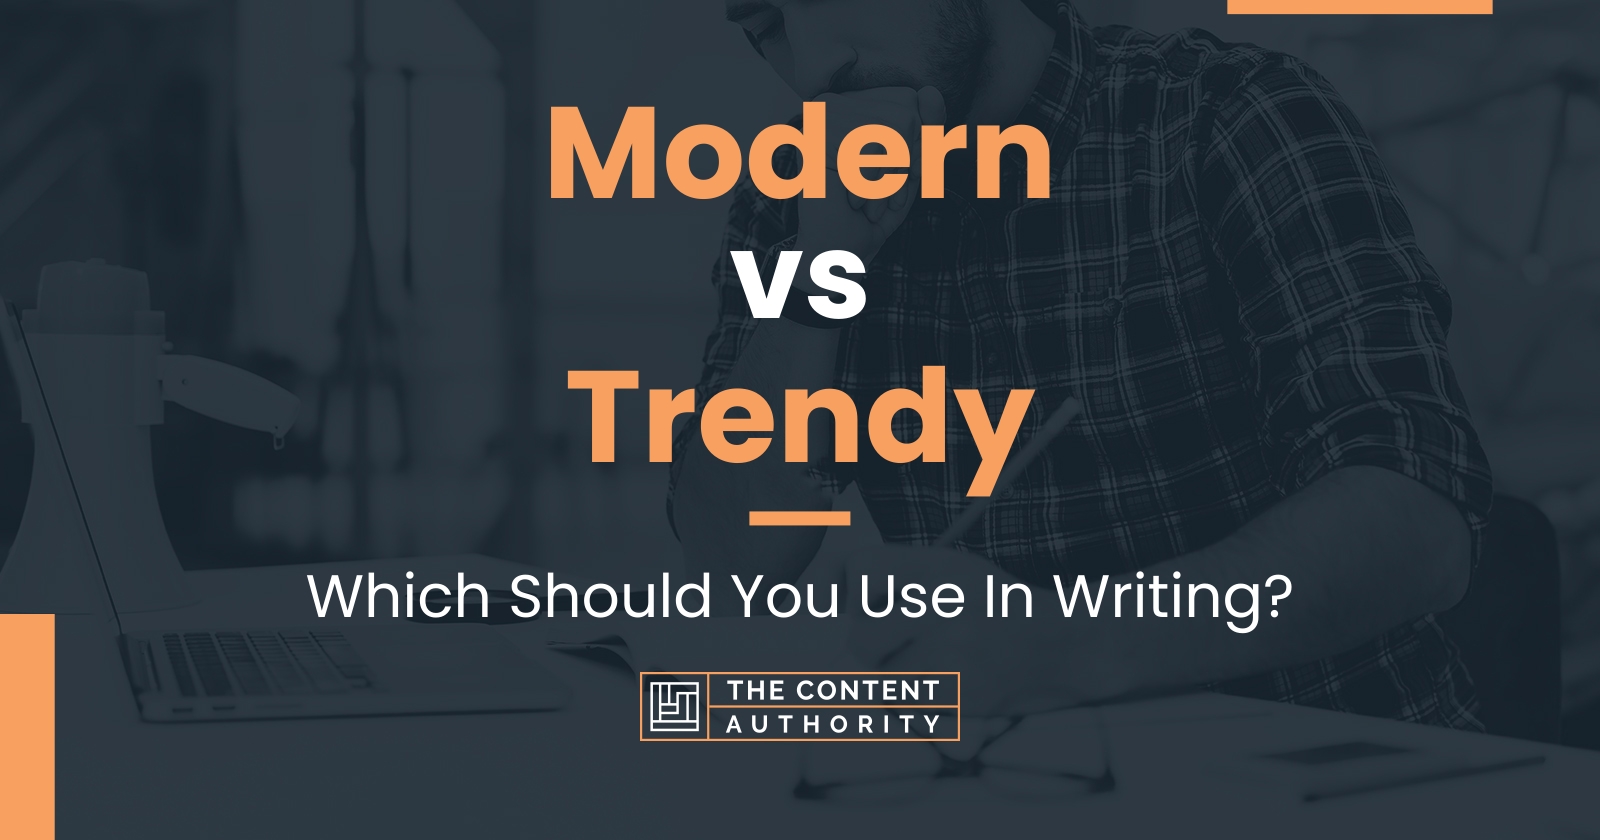 Modern vs Trendy: Which Should You Use In Writing?